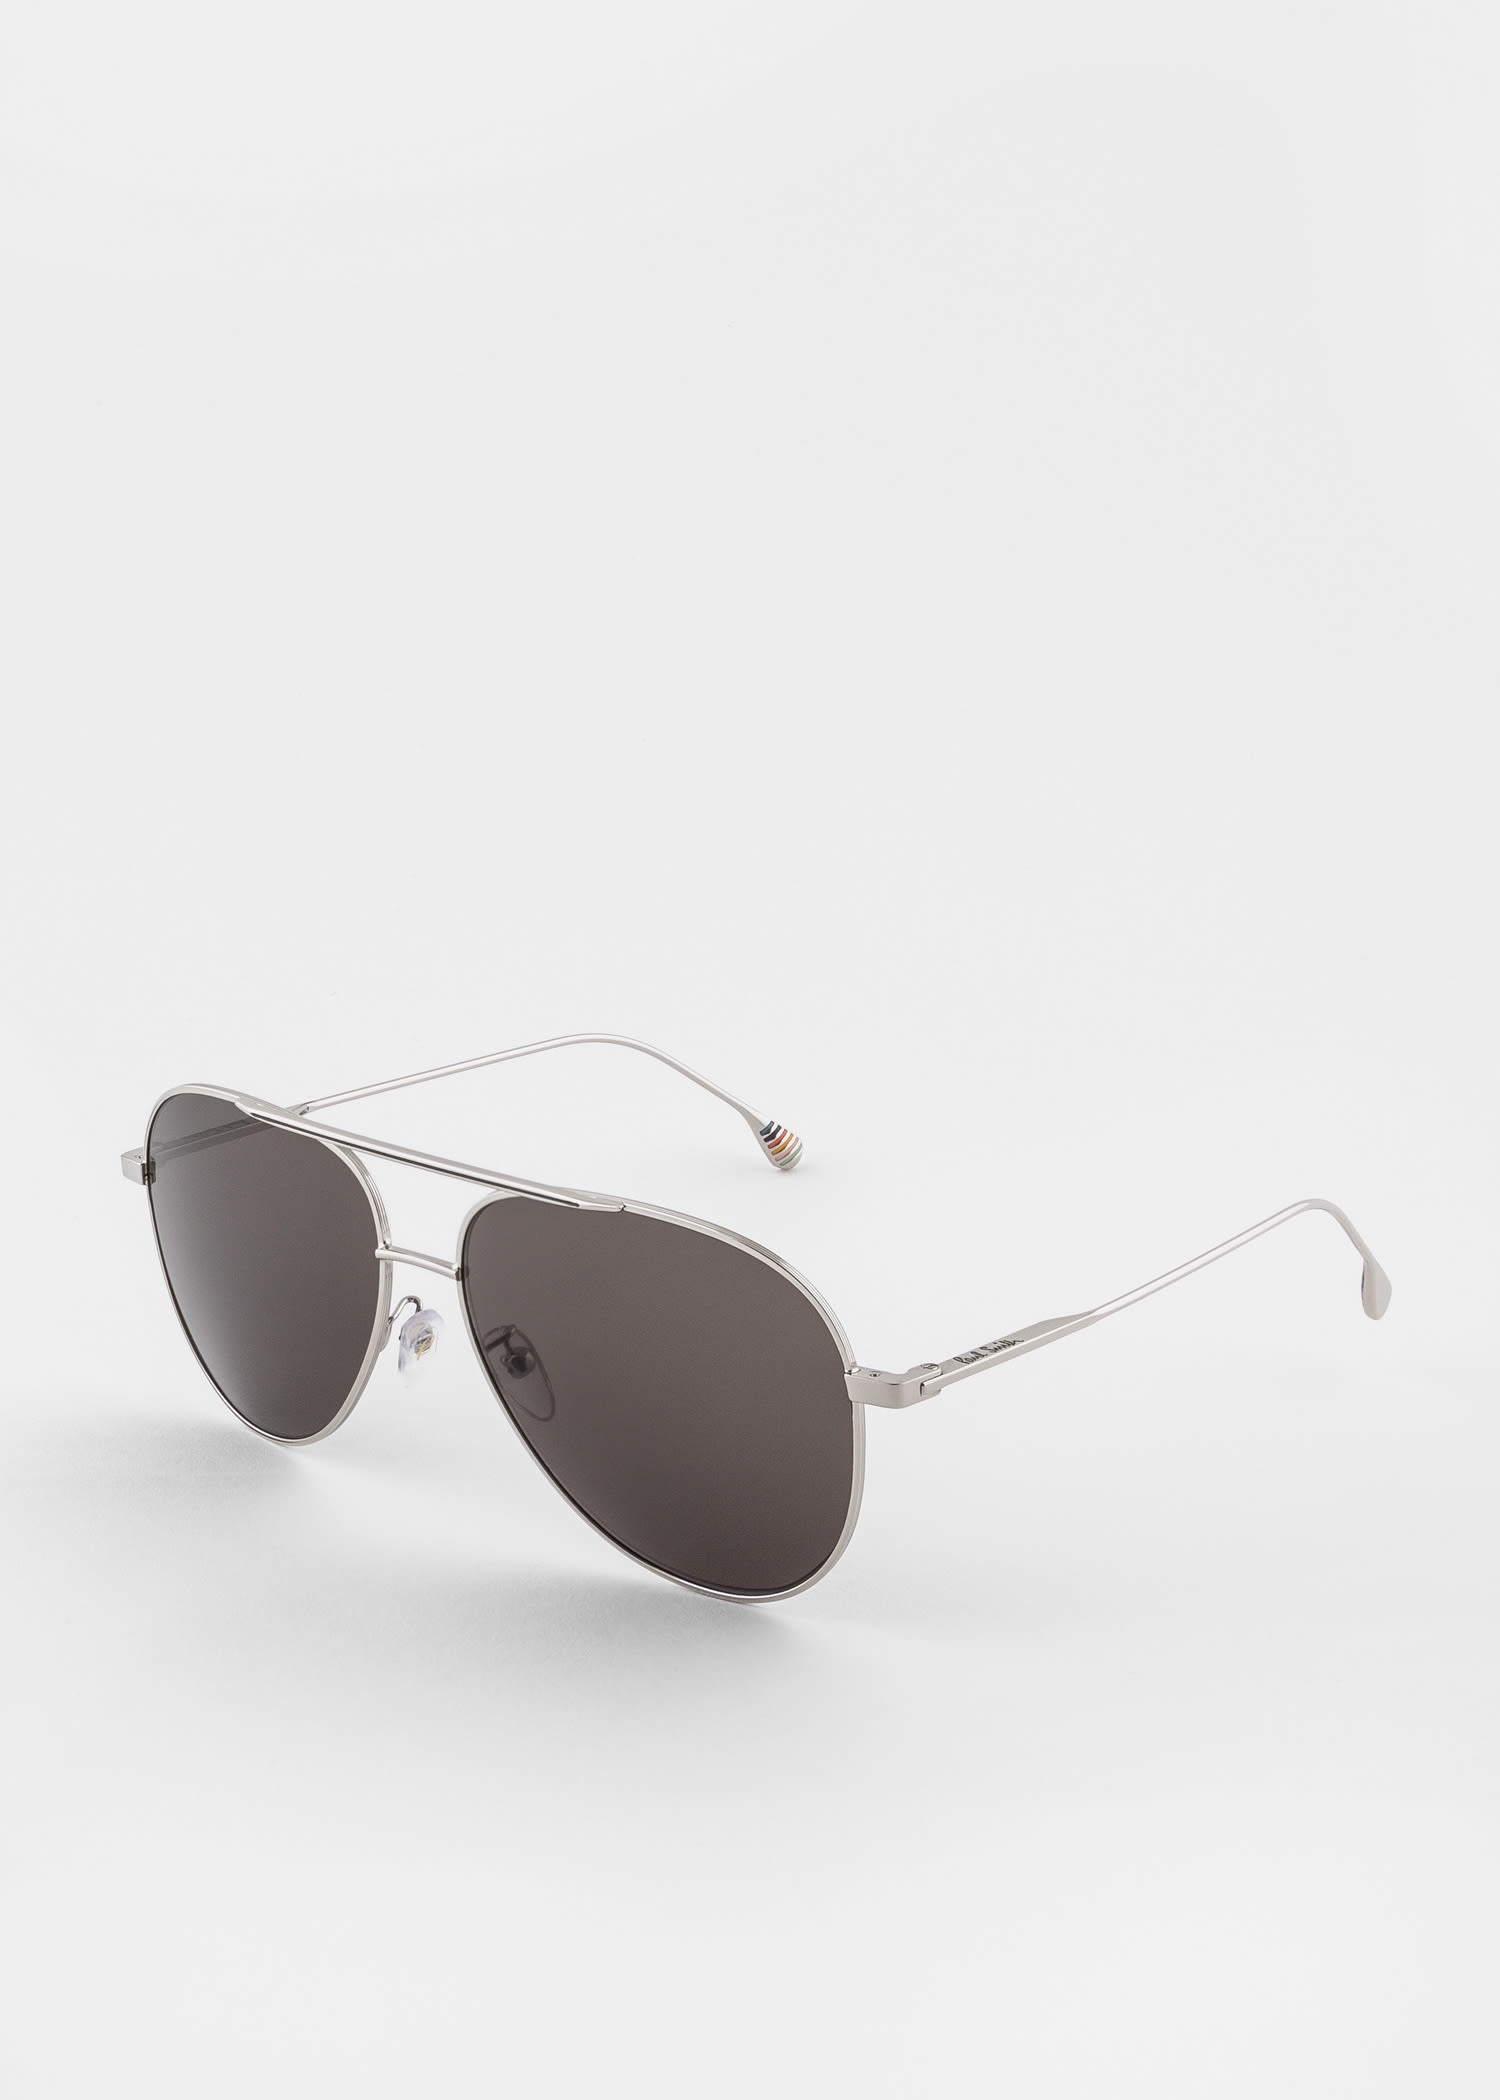 Shiny Silver 'Dylan' Sunglasses - 2